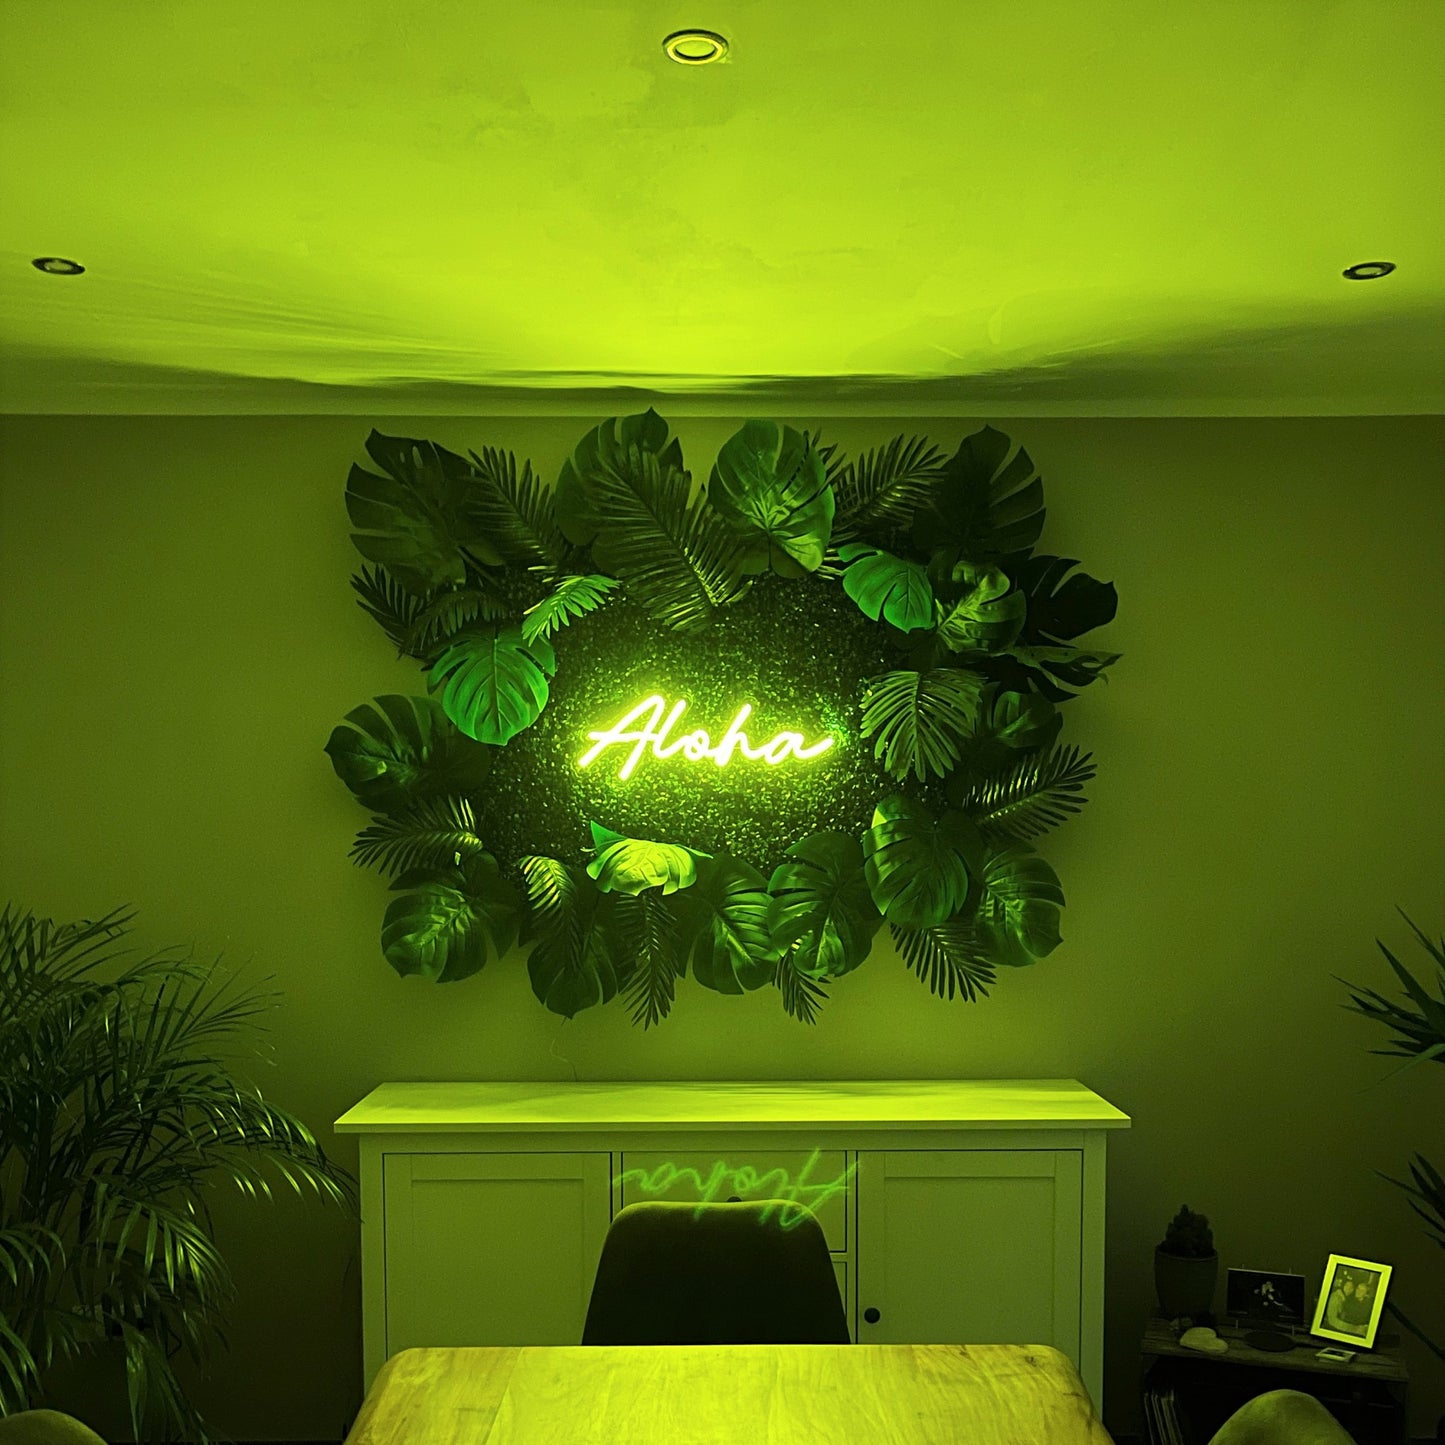 Plant wall "ALOHA COCOA" made of Realtouch artificial plants